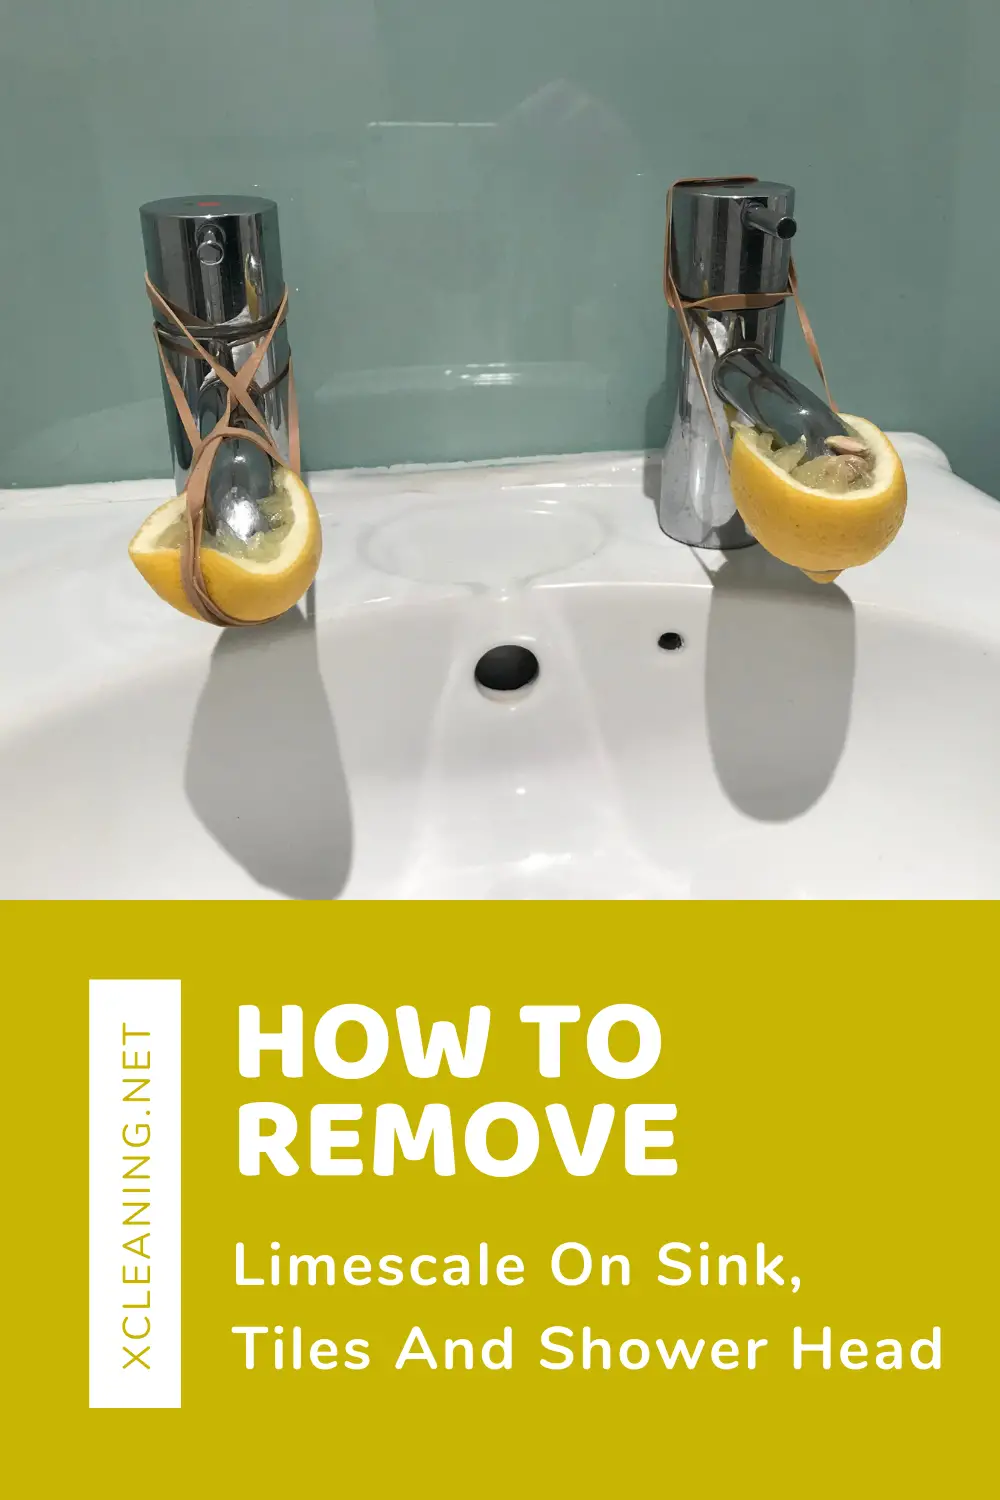 How To Remove Limescale On Sink, Tiles And Shower Head ...